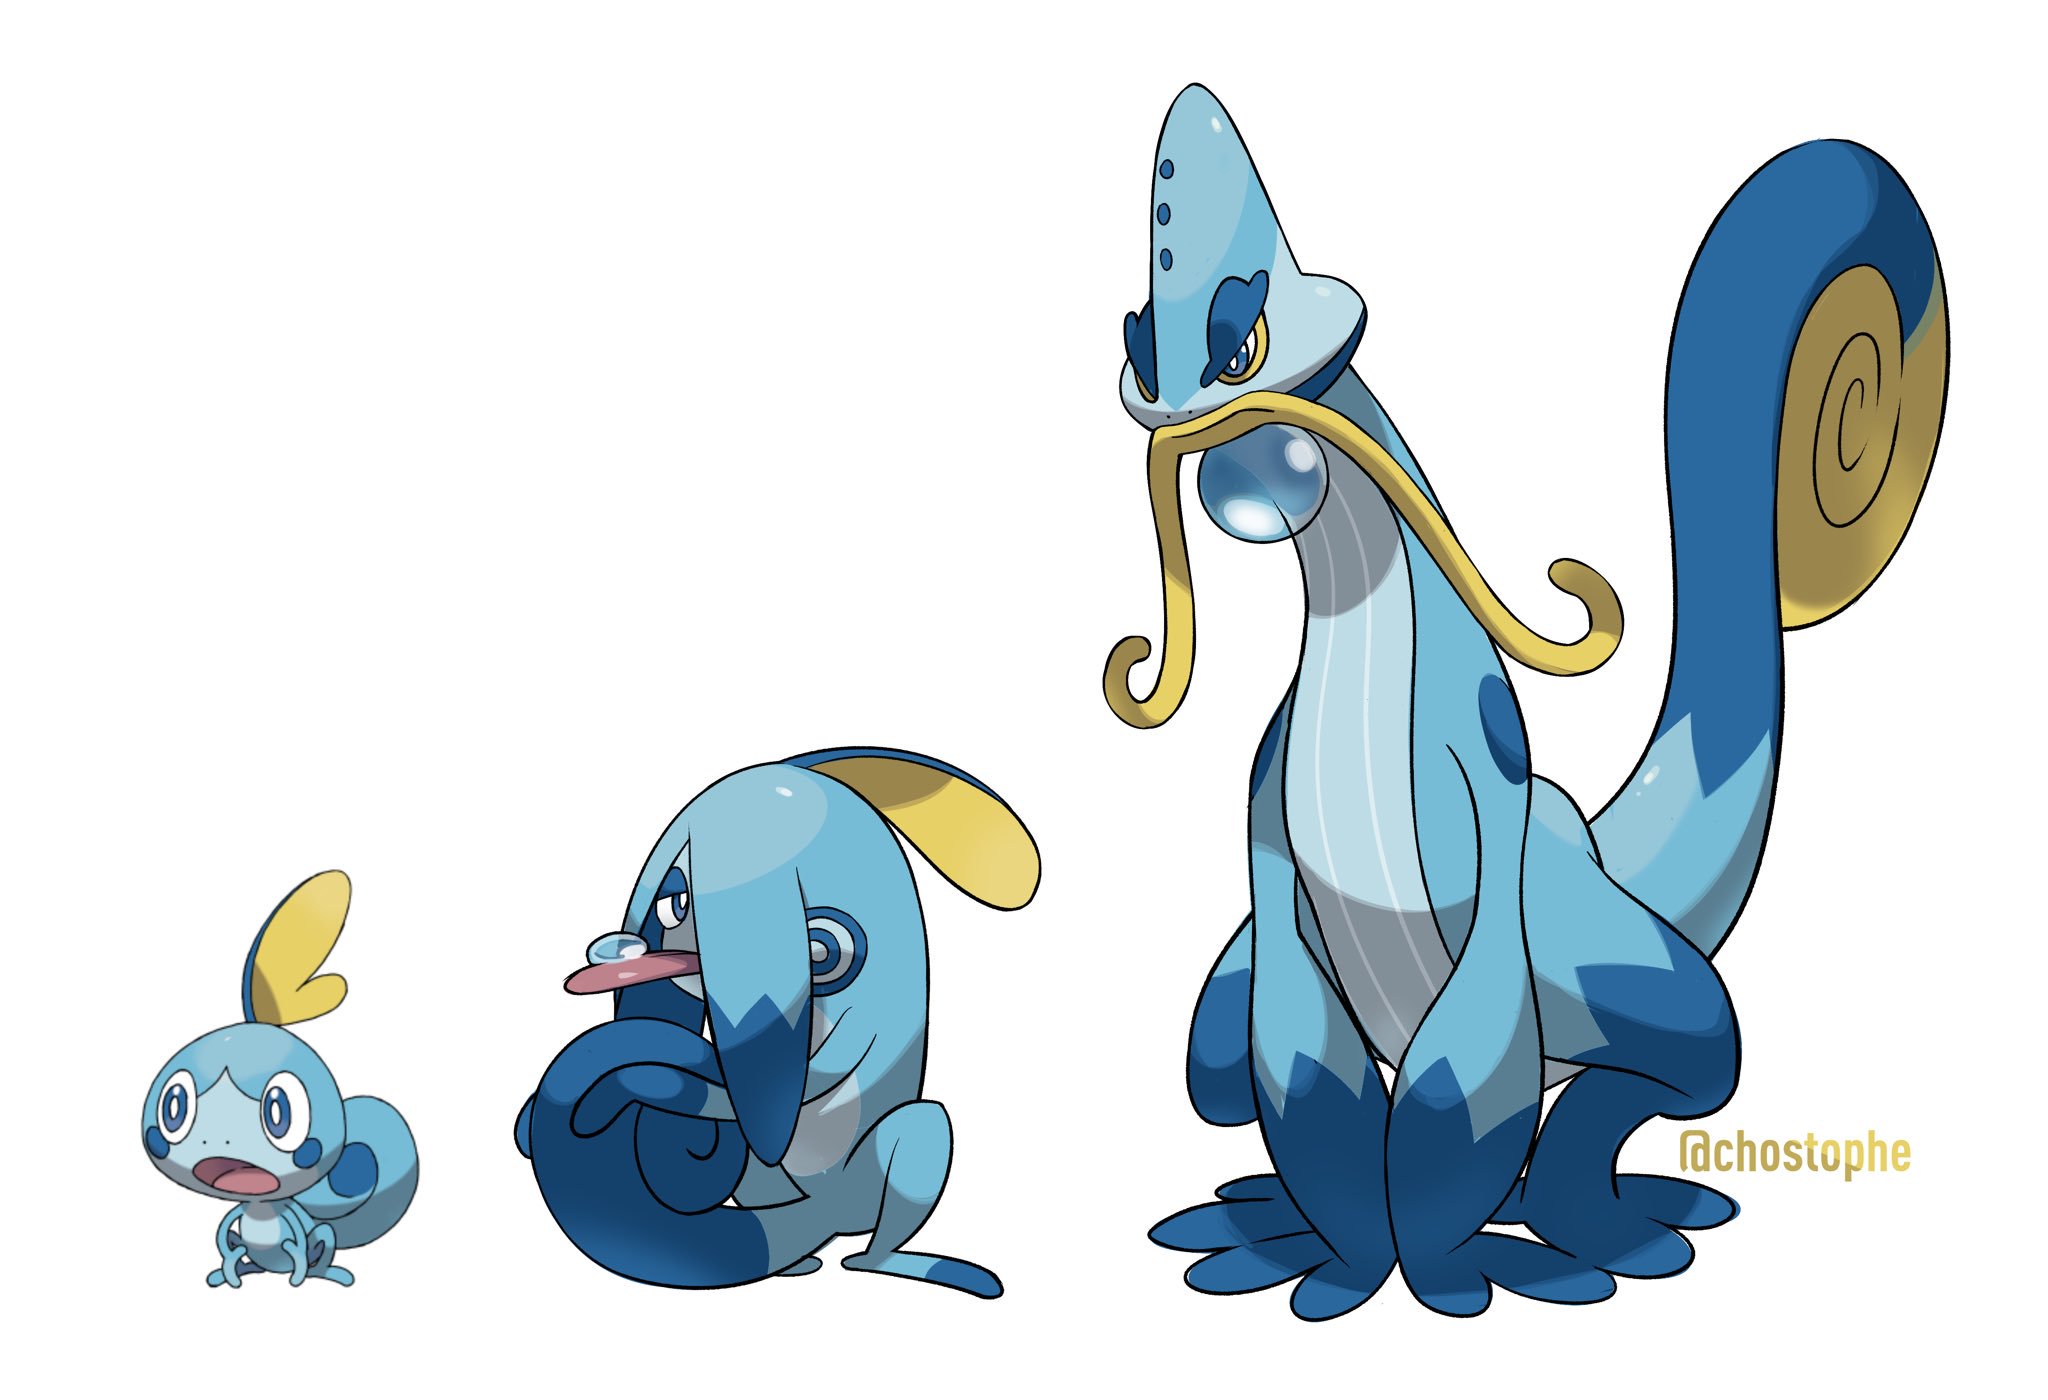 5.000. Tried my hand at some Sobble evolutions! 